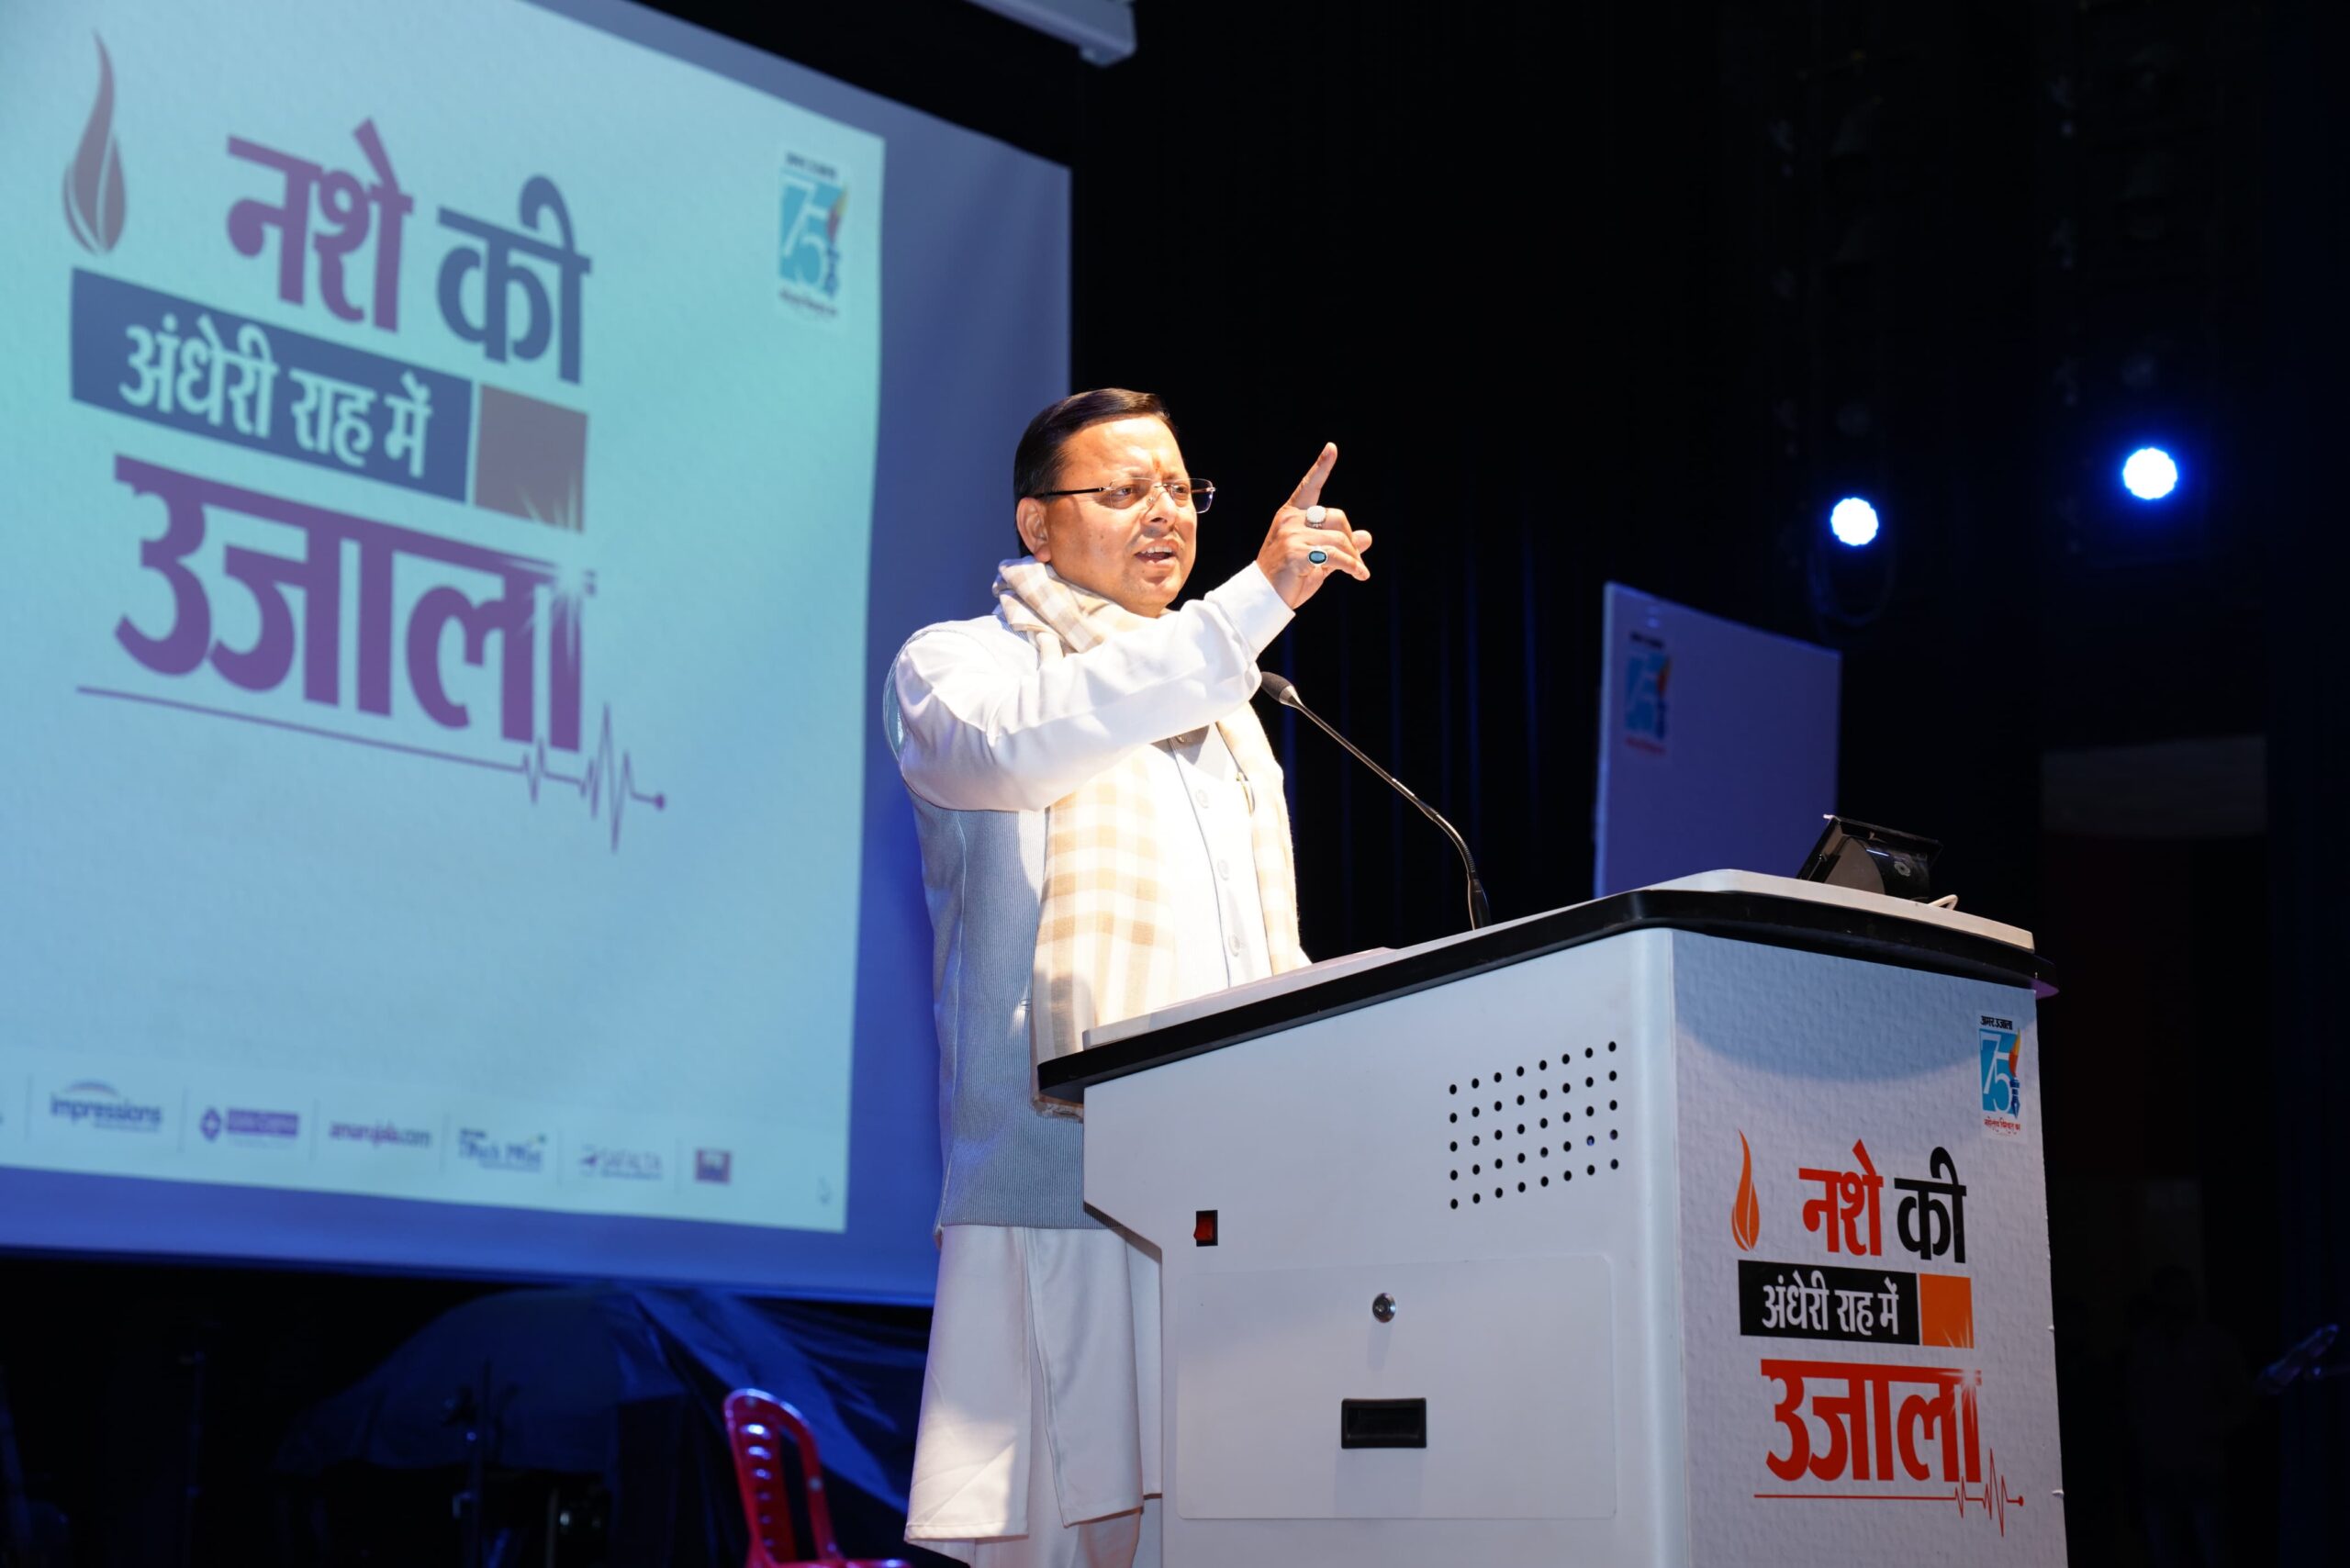 Expecting everyone to cooperate in spreading public awareness against drugs in the society: CM